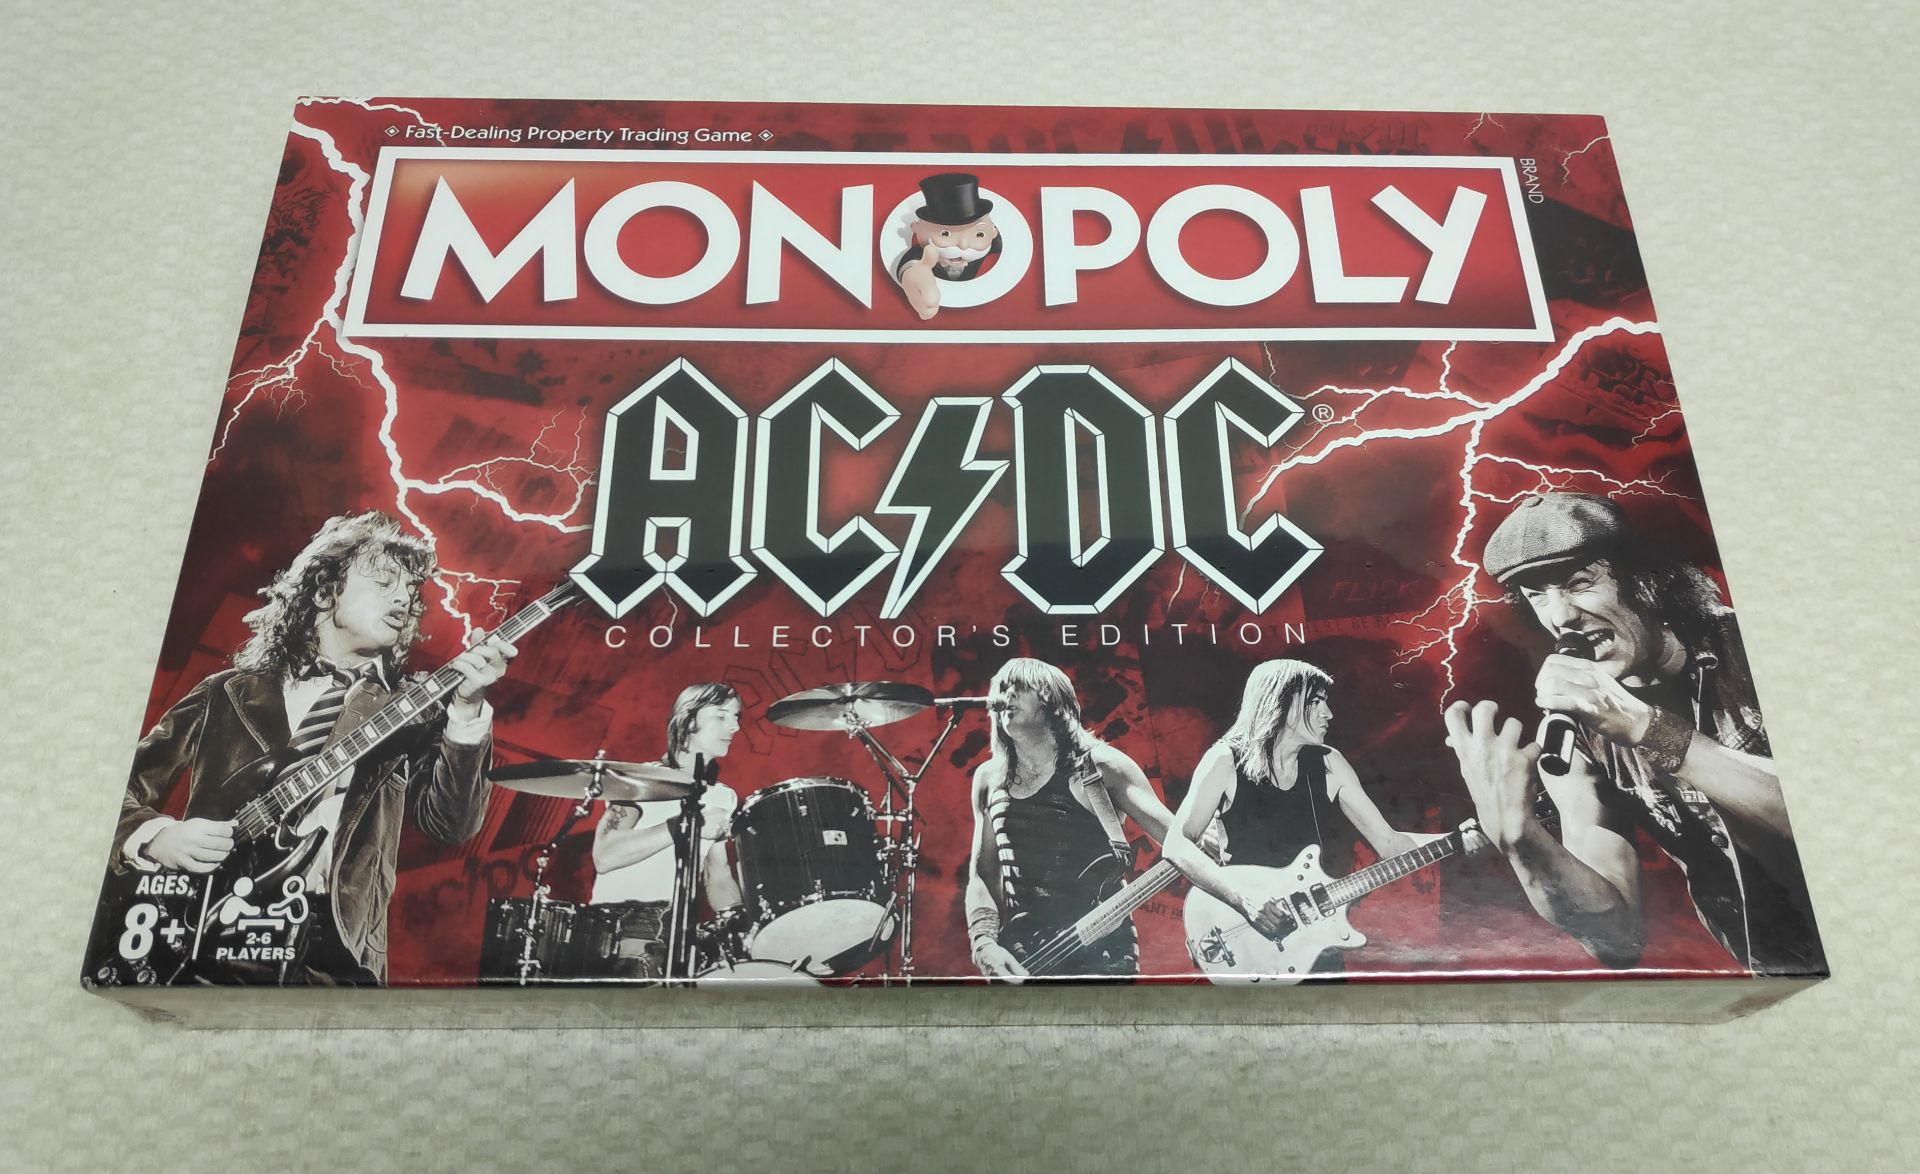 1 x AC/DC Collector's Edition Monopoly - New/Sealed - HTYS169 - CL720 - Location: Altrincham WA14<BR - Image 4 of 8